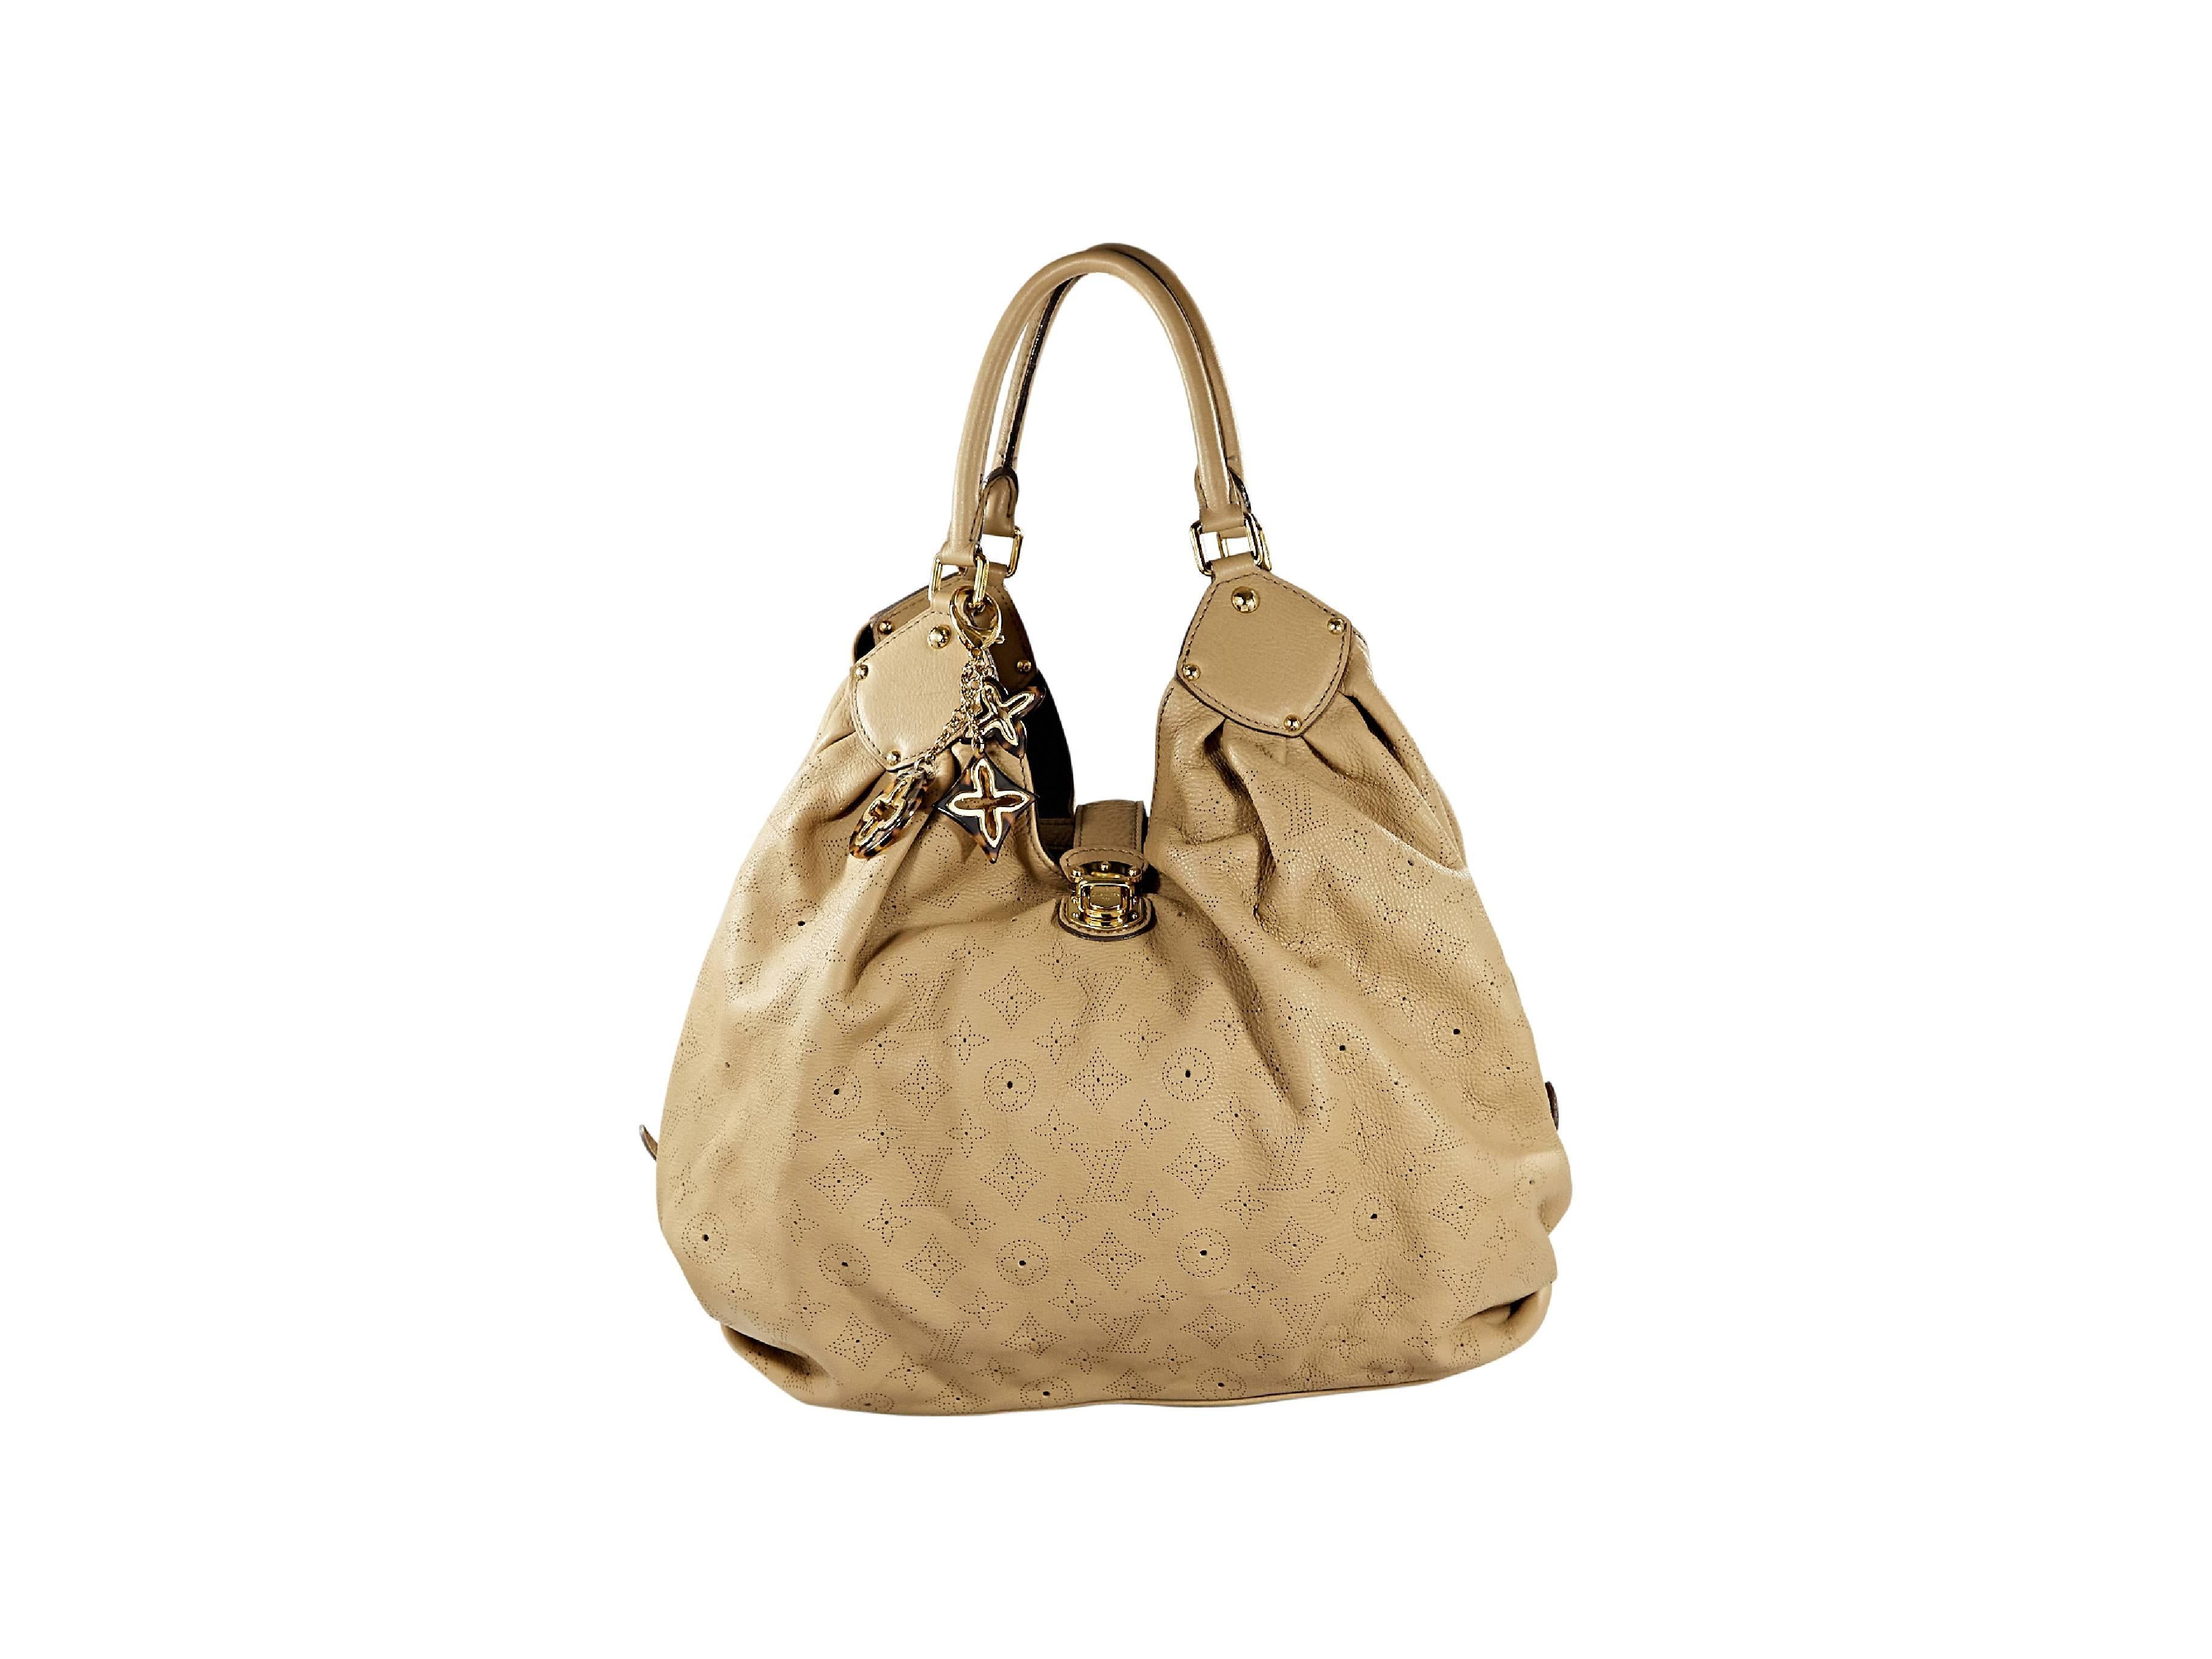 Tan mahina leather XL hobo bag by Louis Vuitton.  Perforated monogram design.  Hanging charm accents.  Double shoulder straps.  Top pushlock strap closure.  Protective metal feet.  Goldtone hardware.  